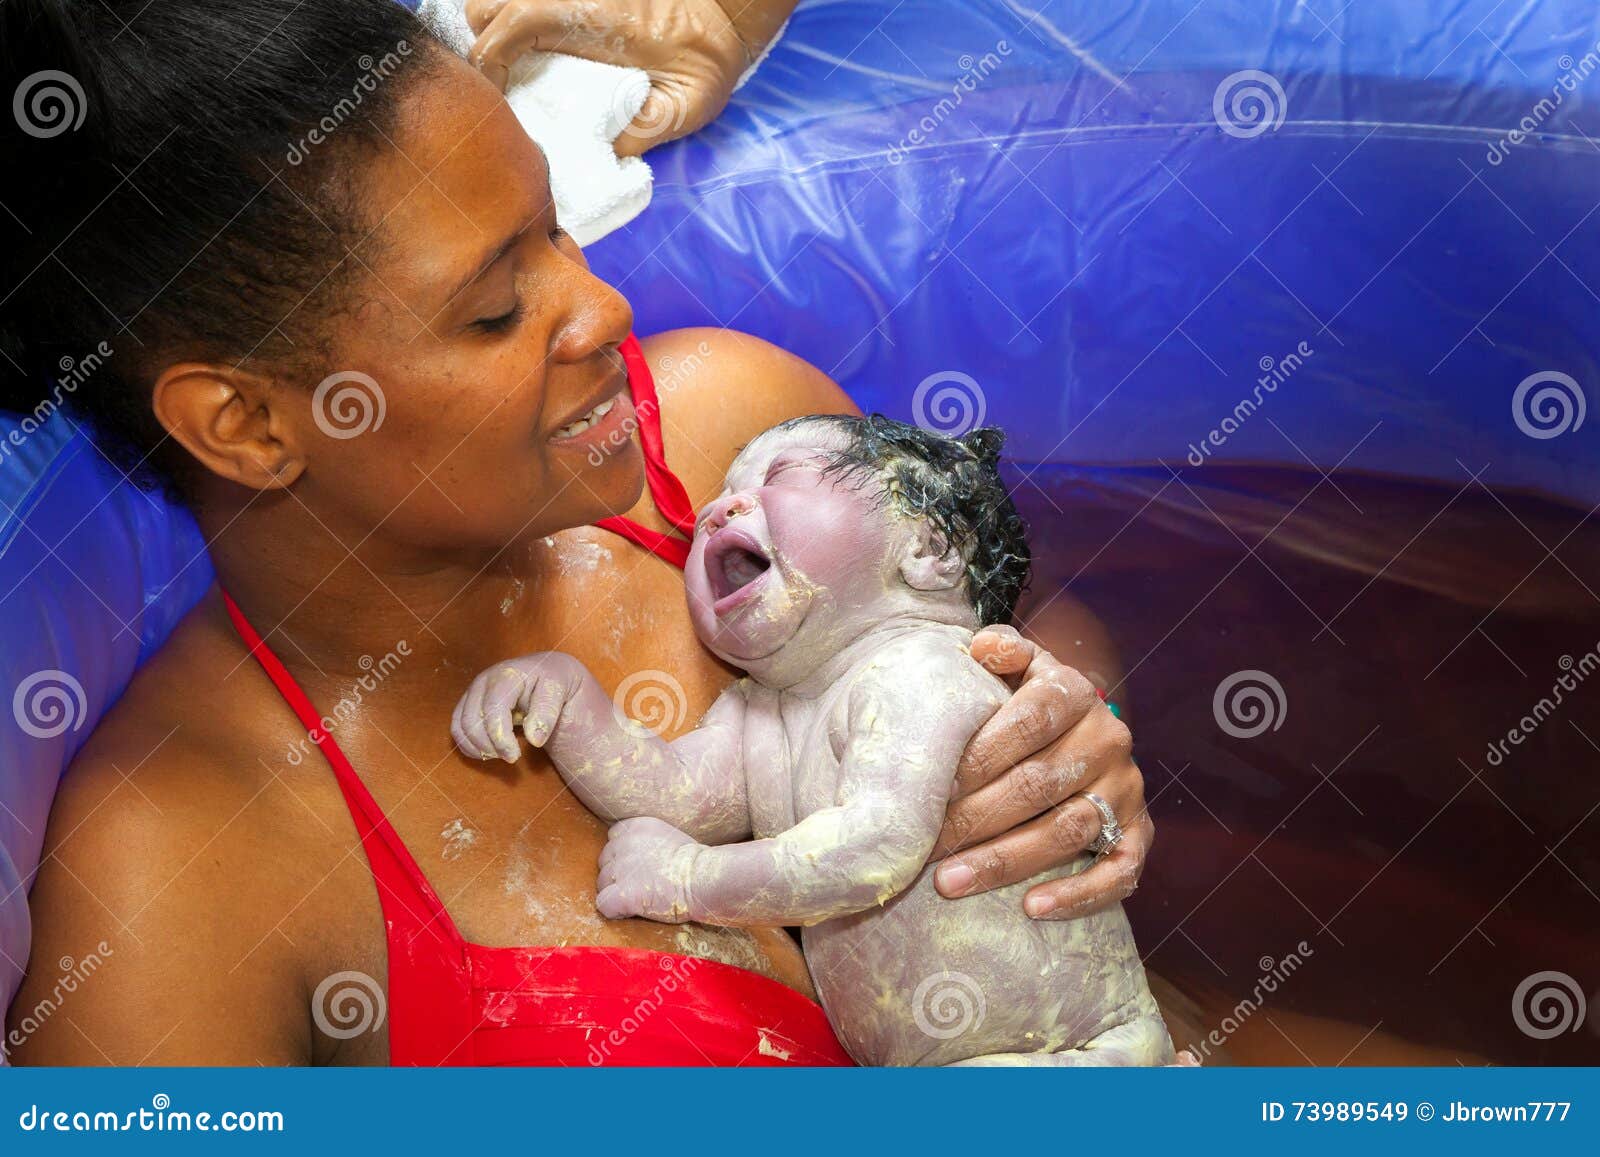 Pregnant Woman Birthing Pool During Natural Stock Photo 1519293950